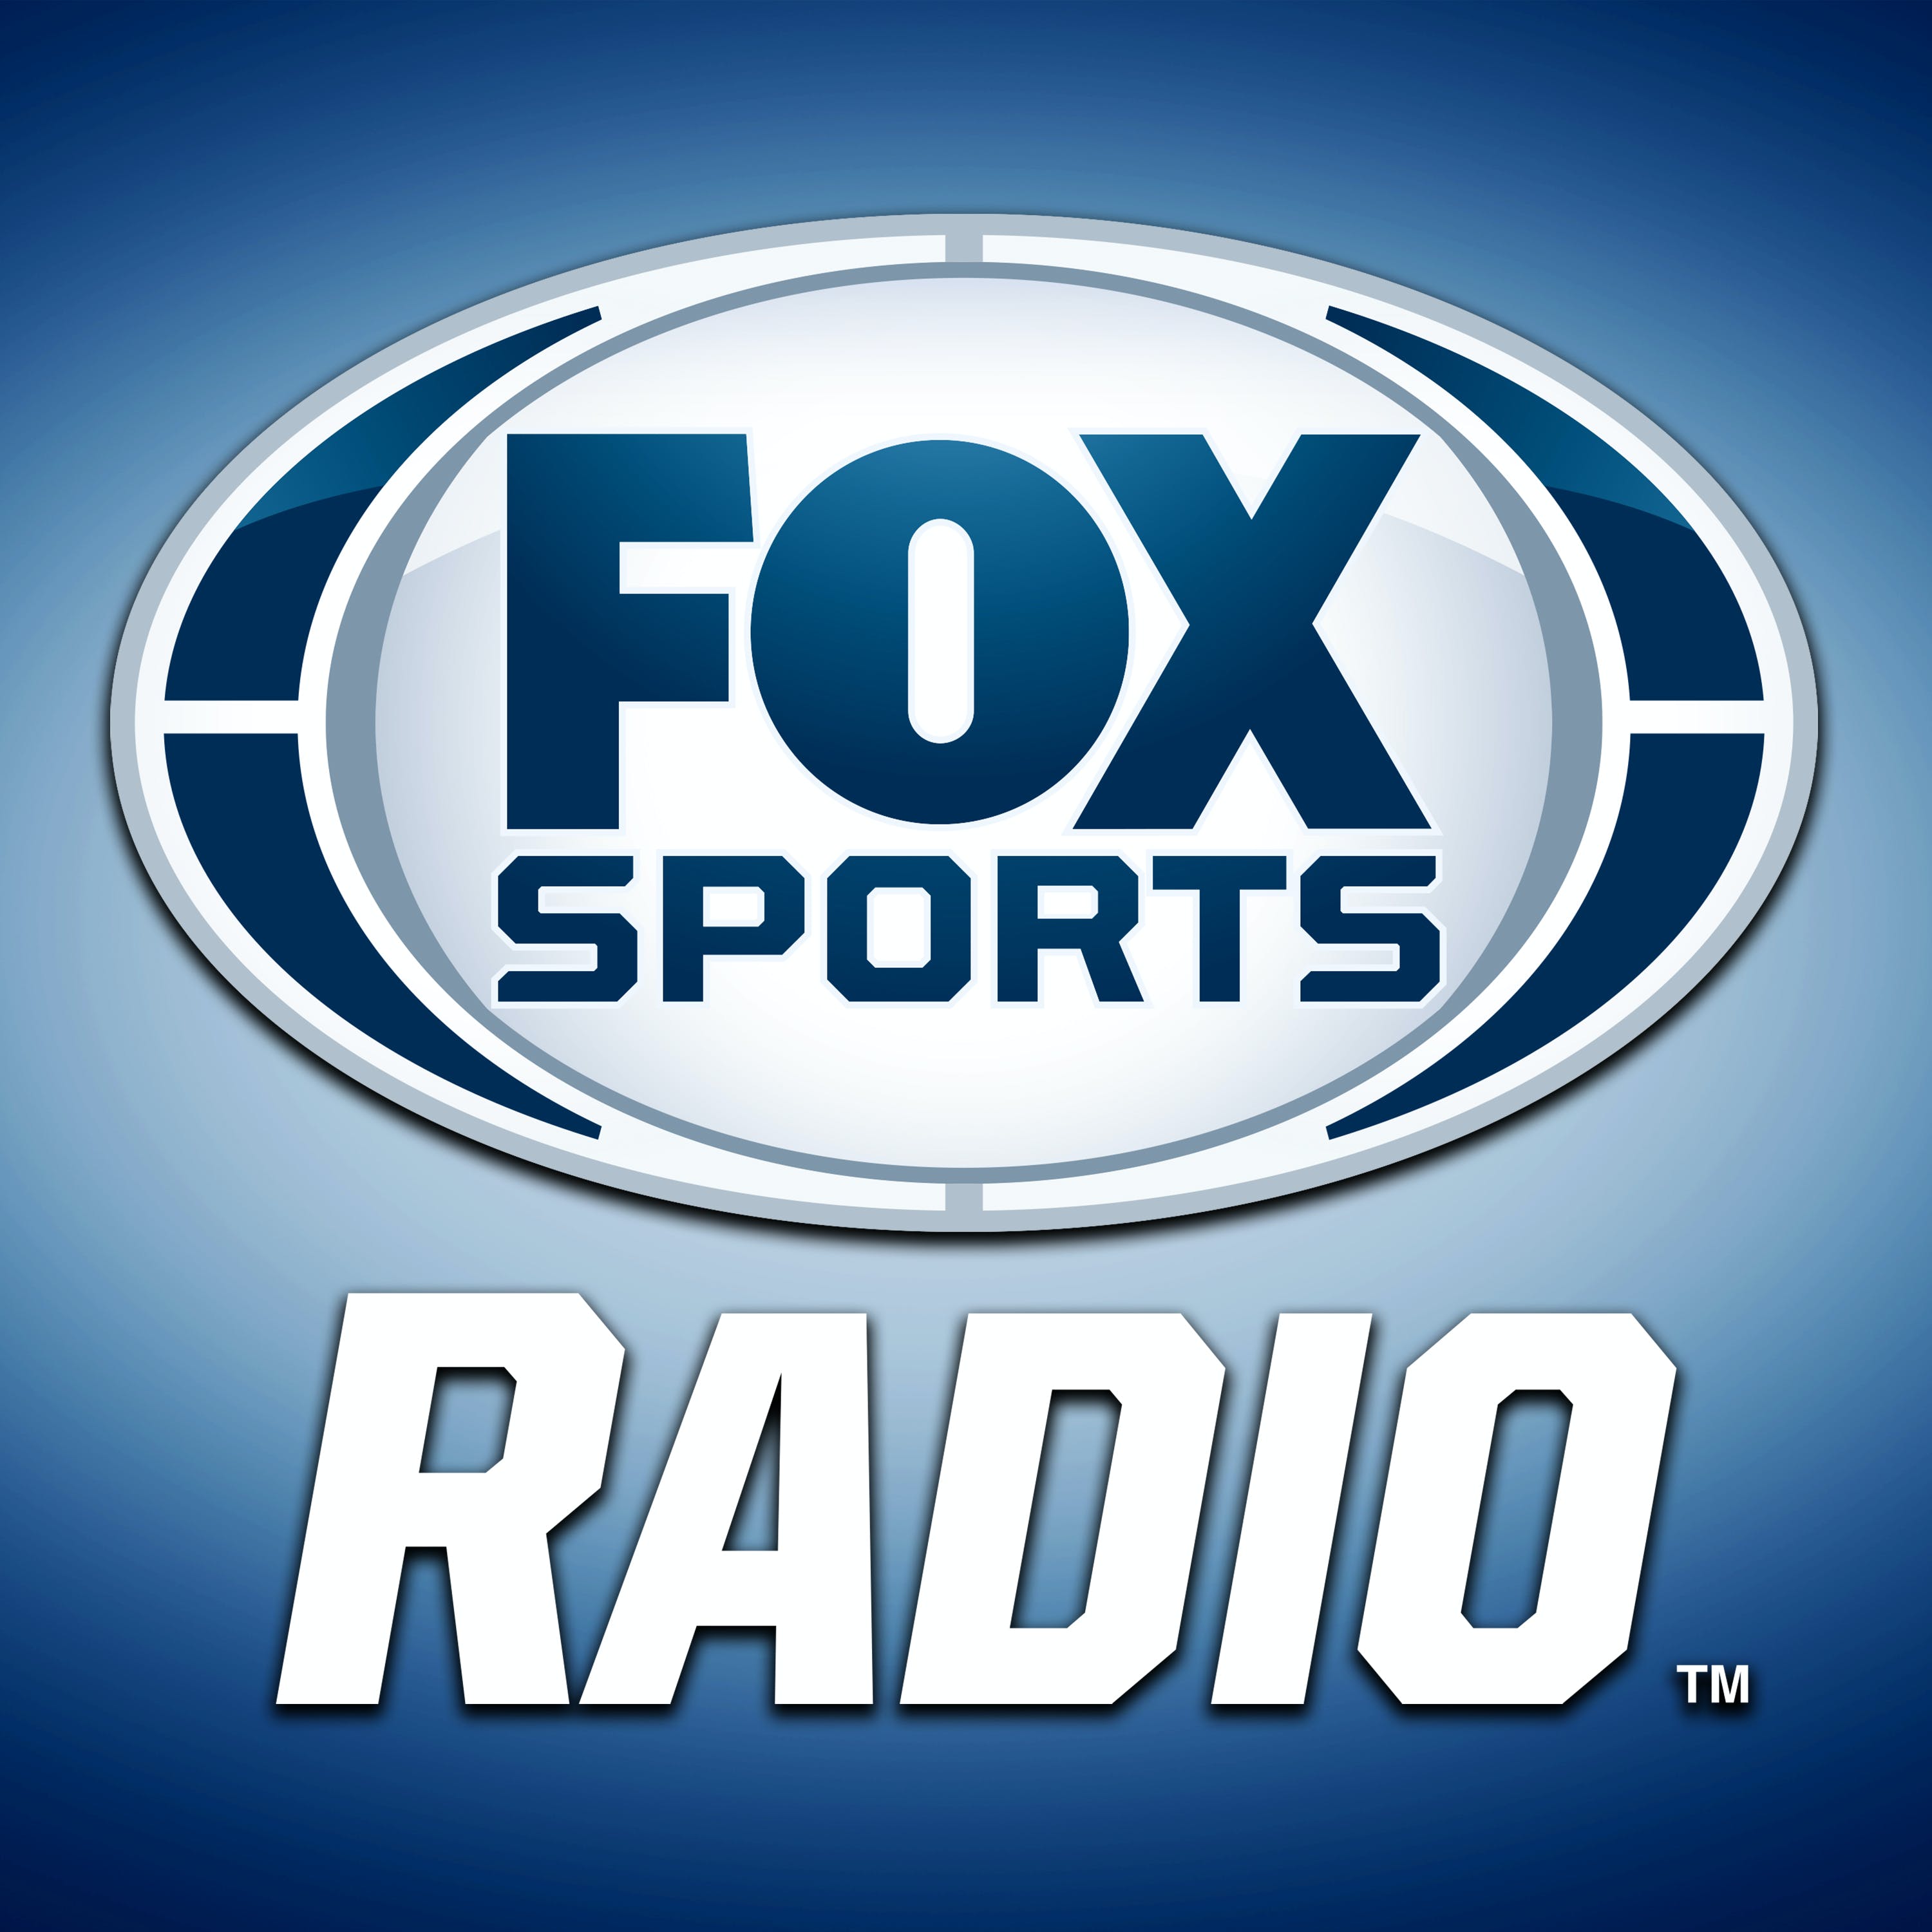 05/01/2021 - FOX Sports Saturday with Arnie Spanier and Aaron Torres